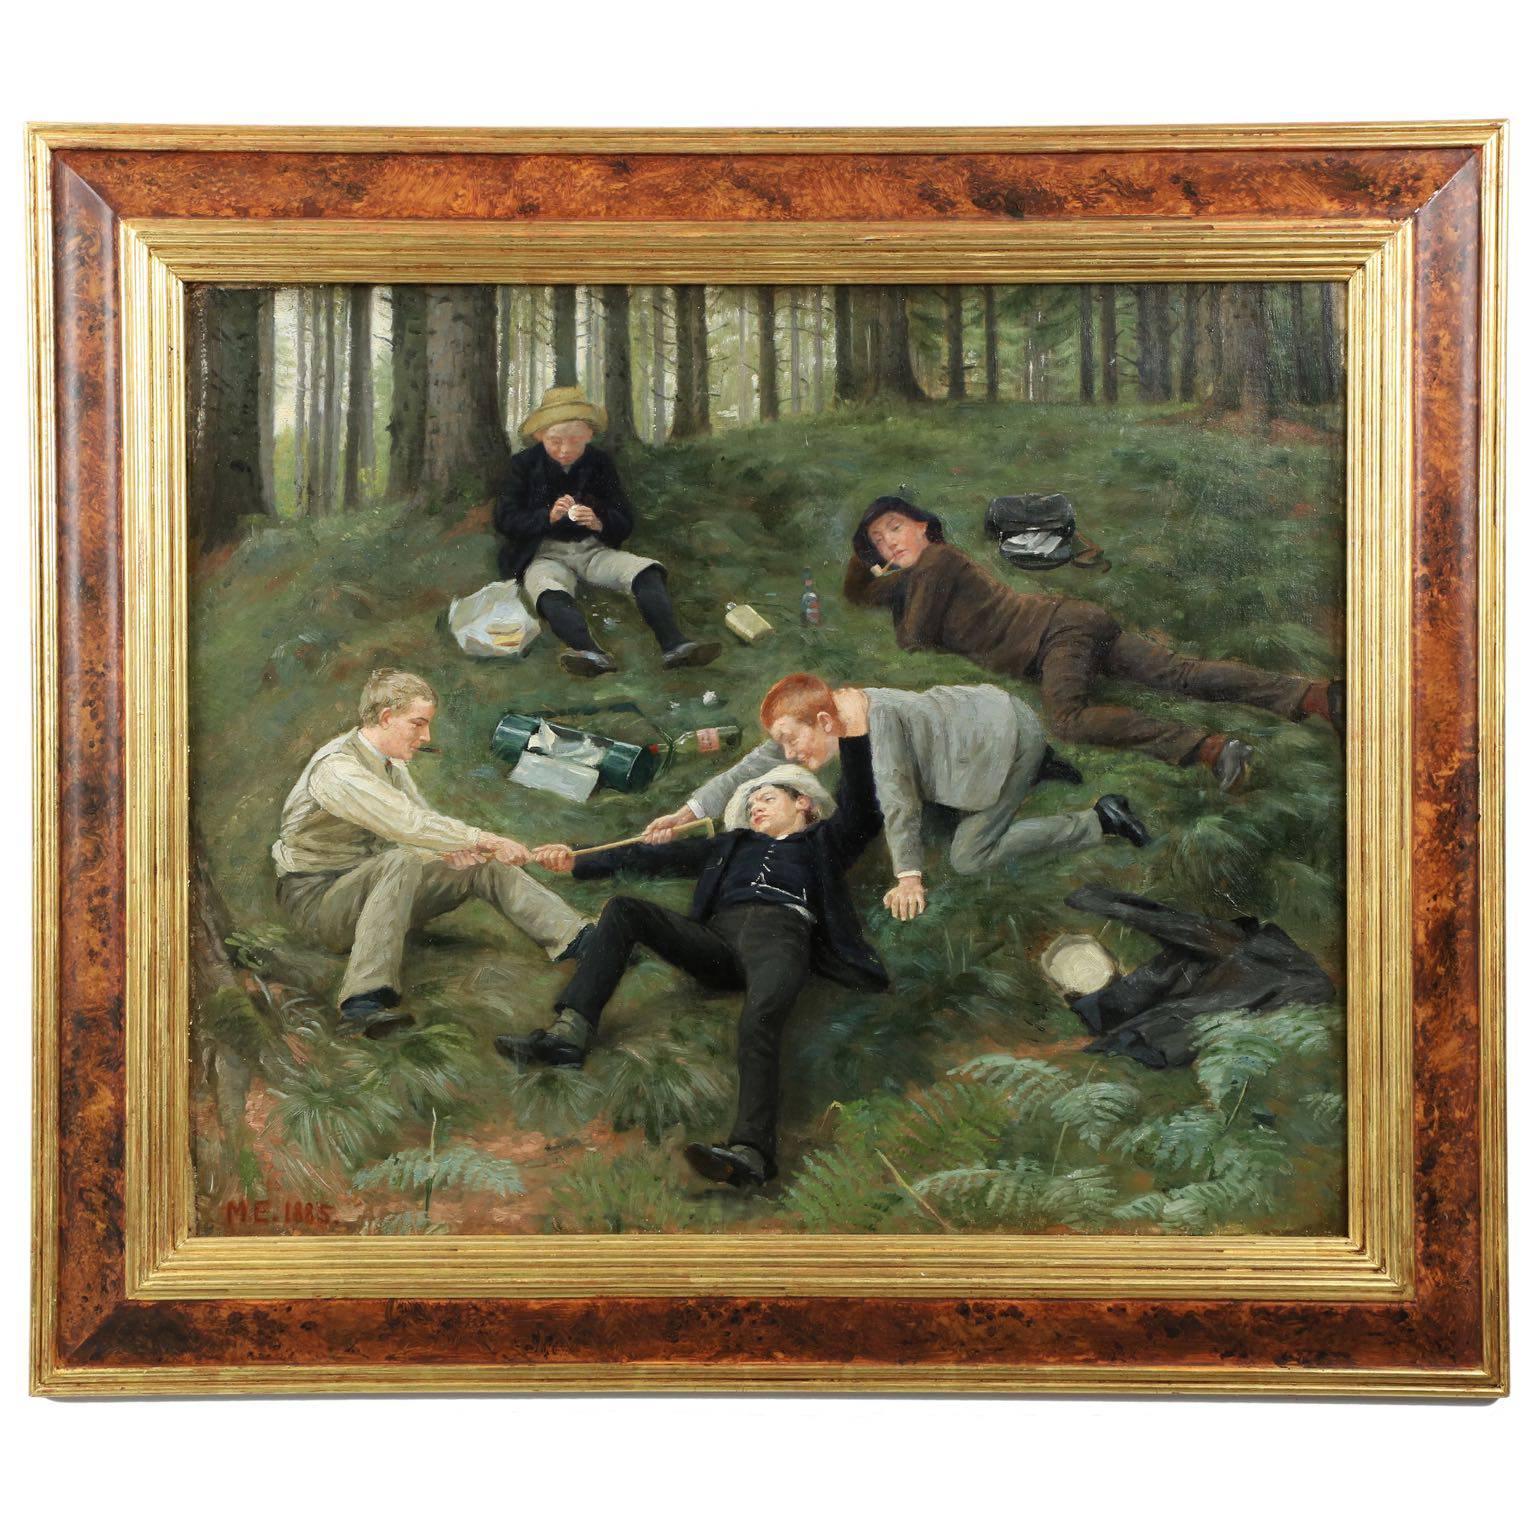 Malthe Engelsted Oil Painting of "Afternoon Frolics, " circa 1885